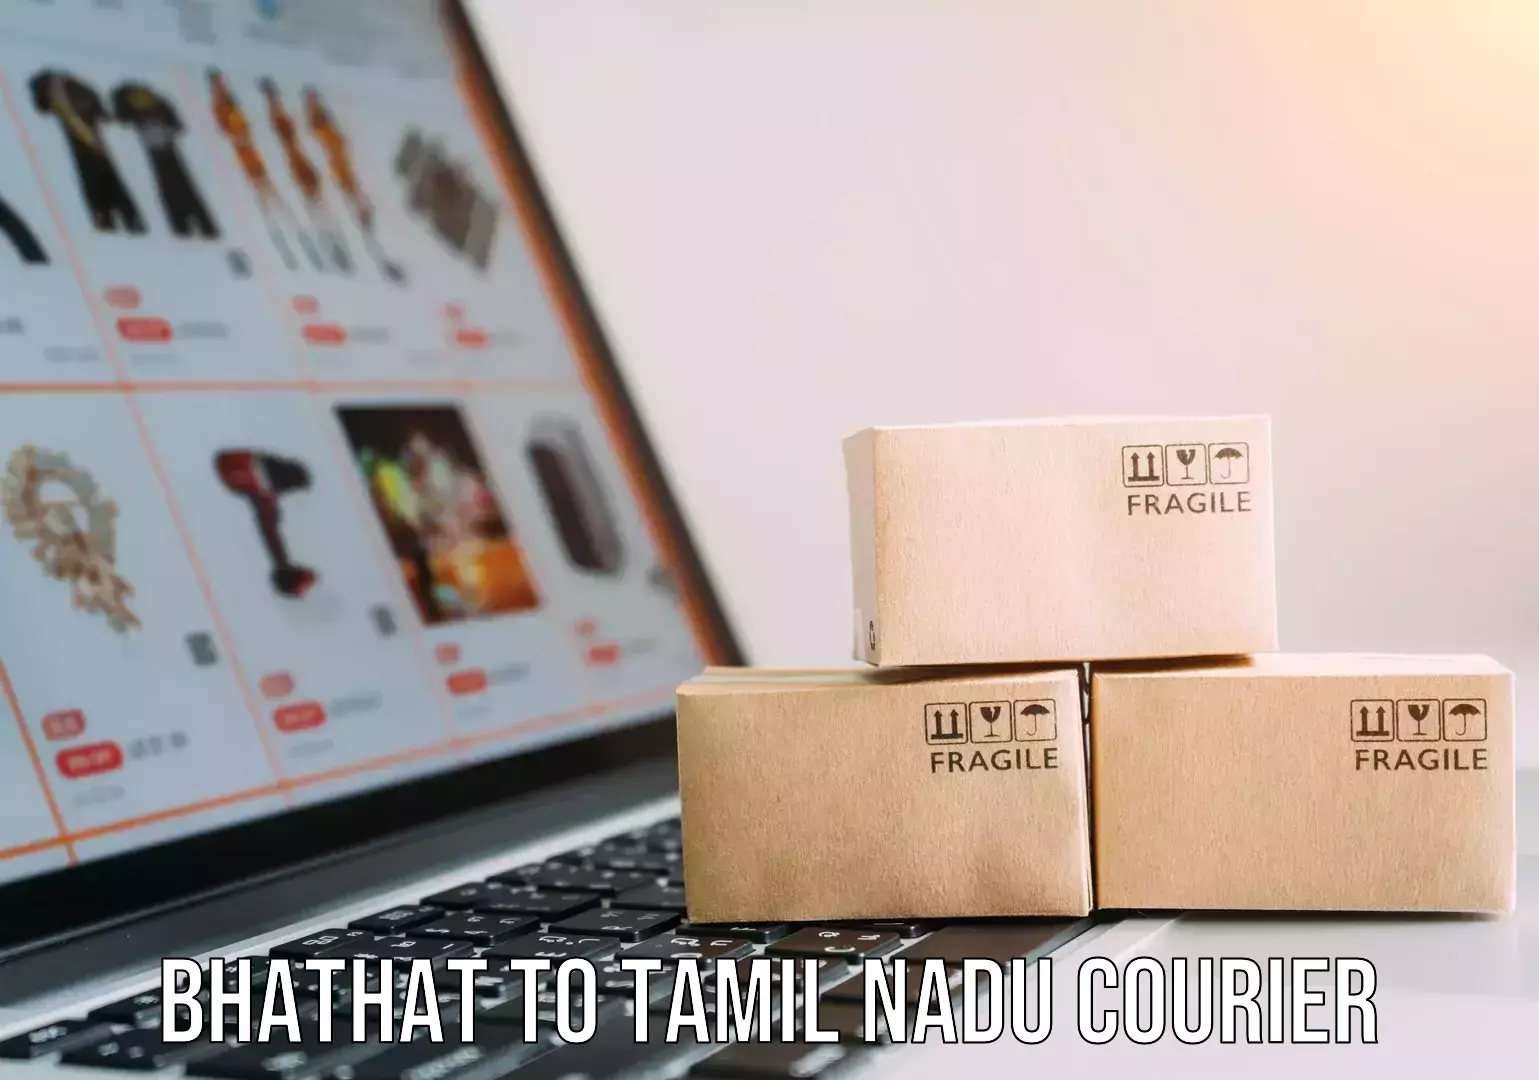 Overnight delivery services Bhathat to Tamil Nadu